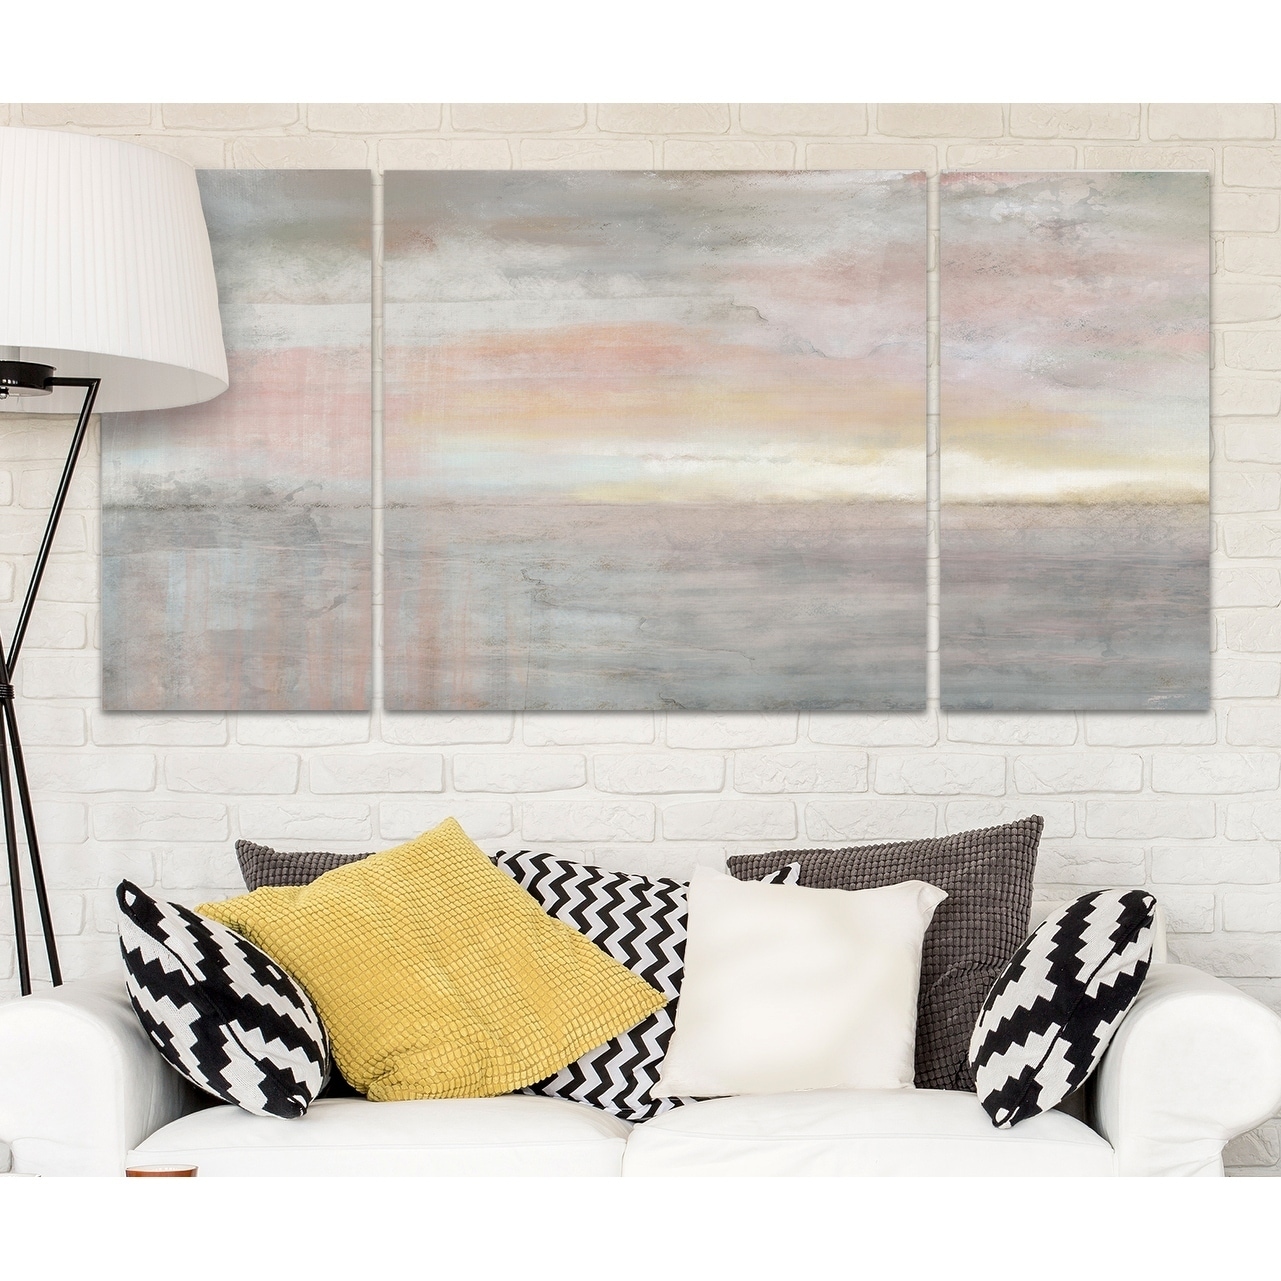 Wexford Home 'Early Morning' 3-piece Wall Art Set